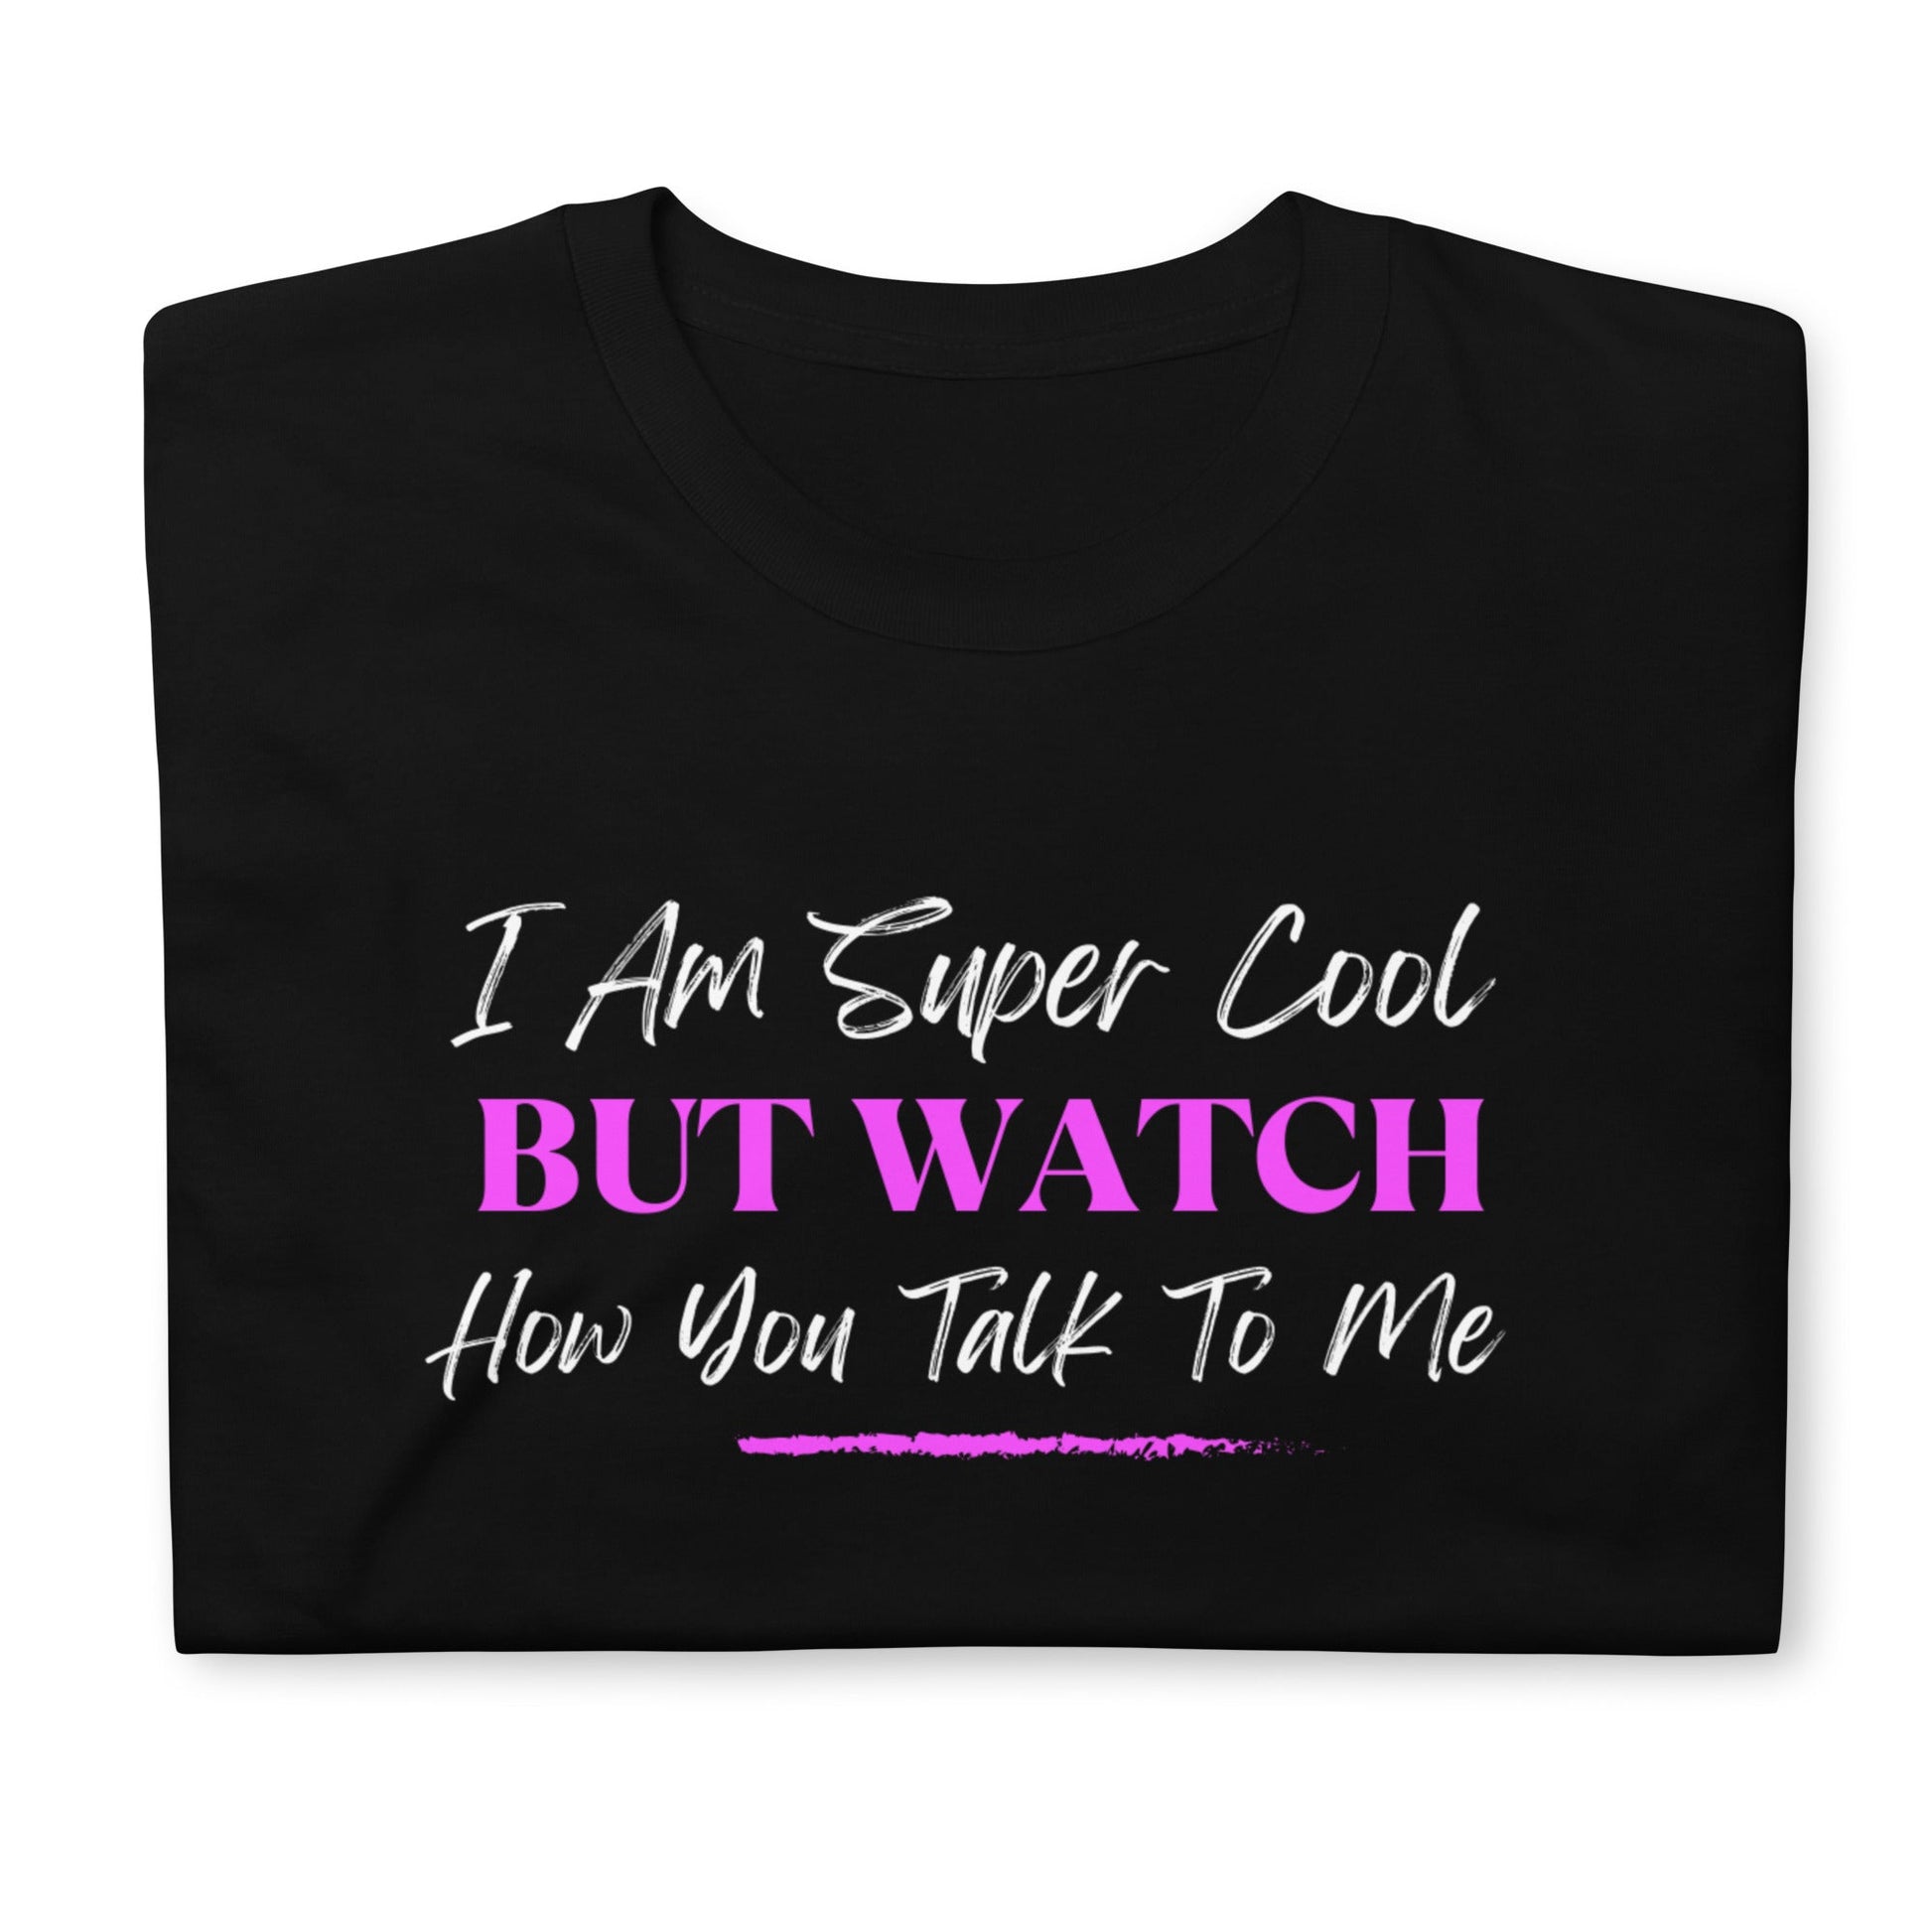 I am Super Cool But Watch How You Talk To Me Short-Sleeve Unisex T-Shirt (For a Slim Fit Order A Size Down) - Catch This Tea Shirts